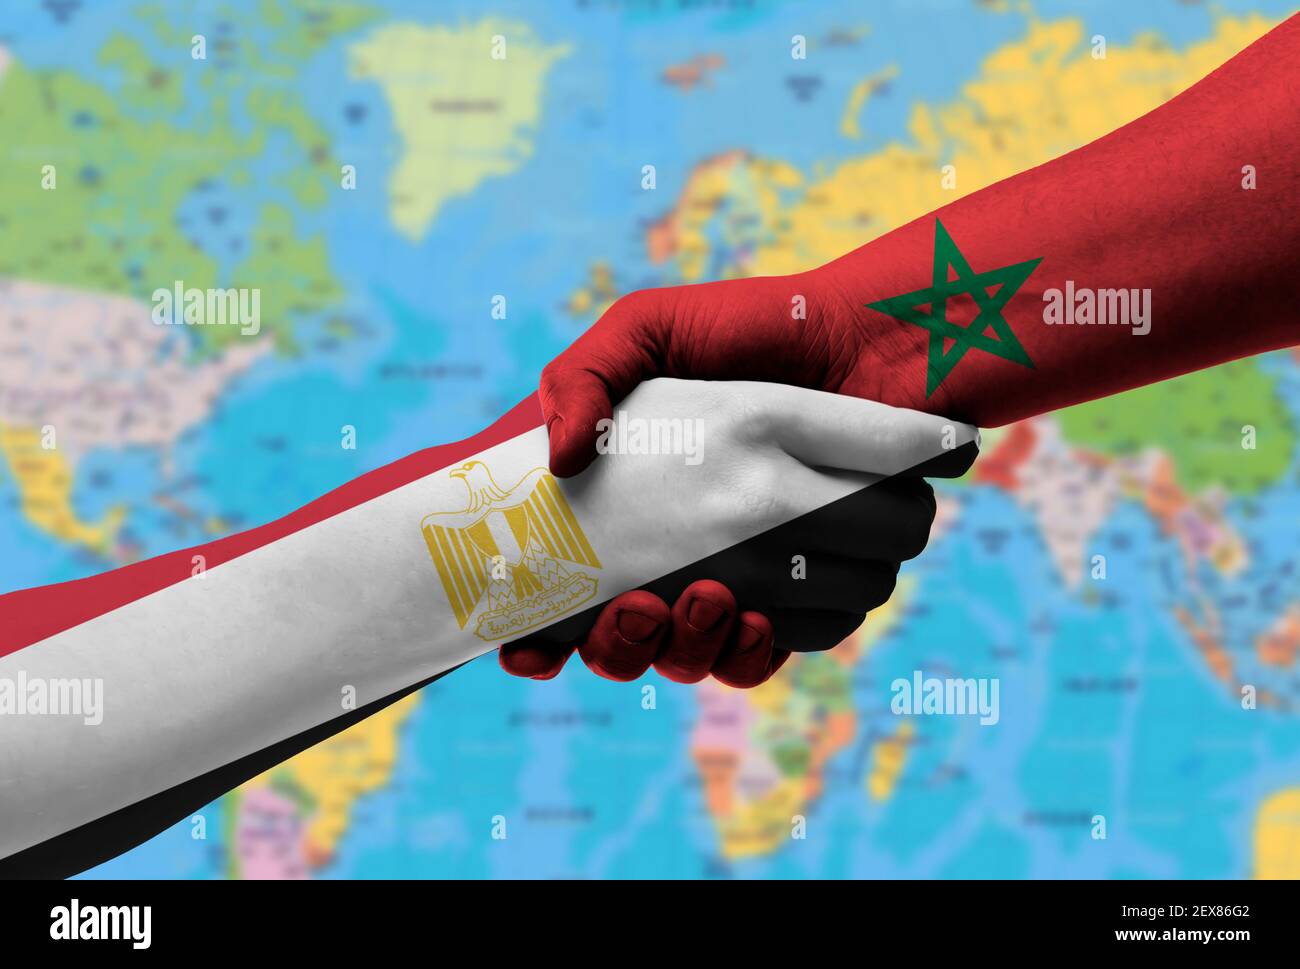 Handshake between egypt  and morocco flags painted on hands, illustration with clipping path. Stock Photo